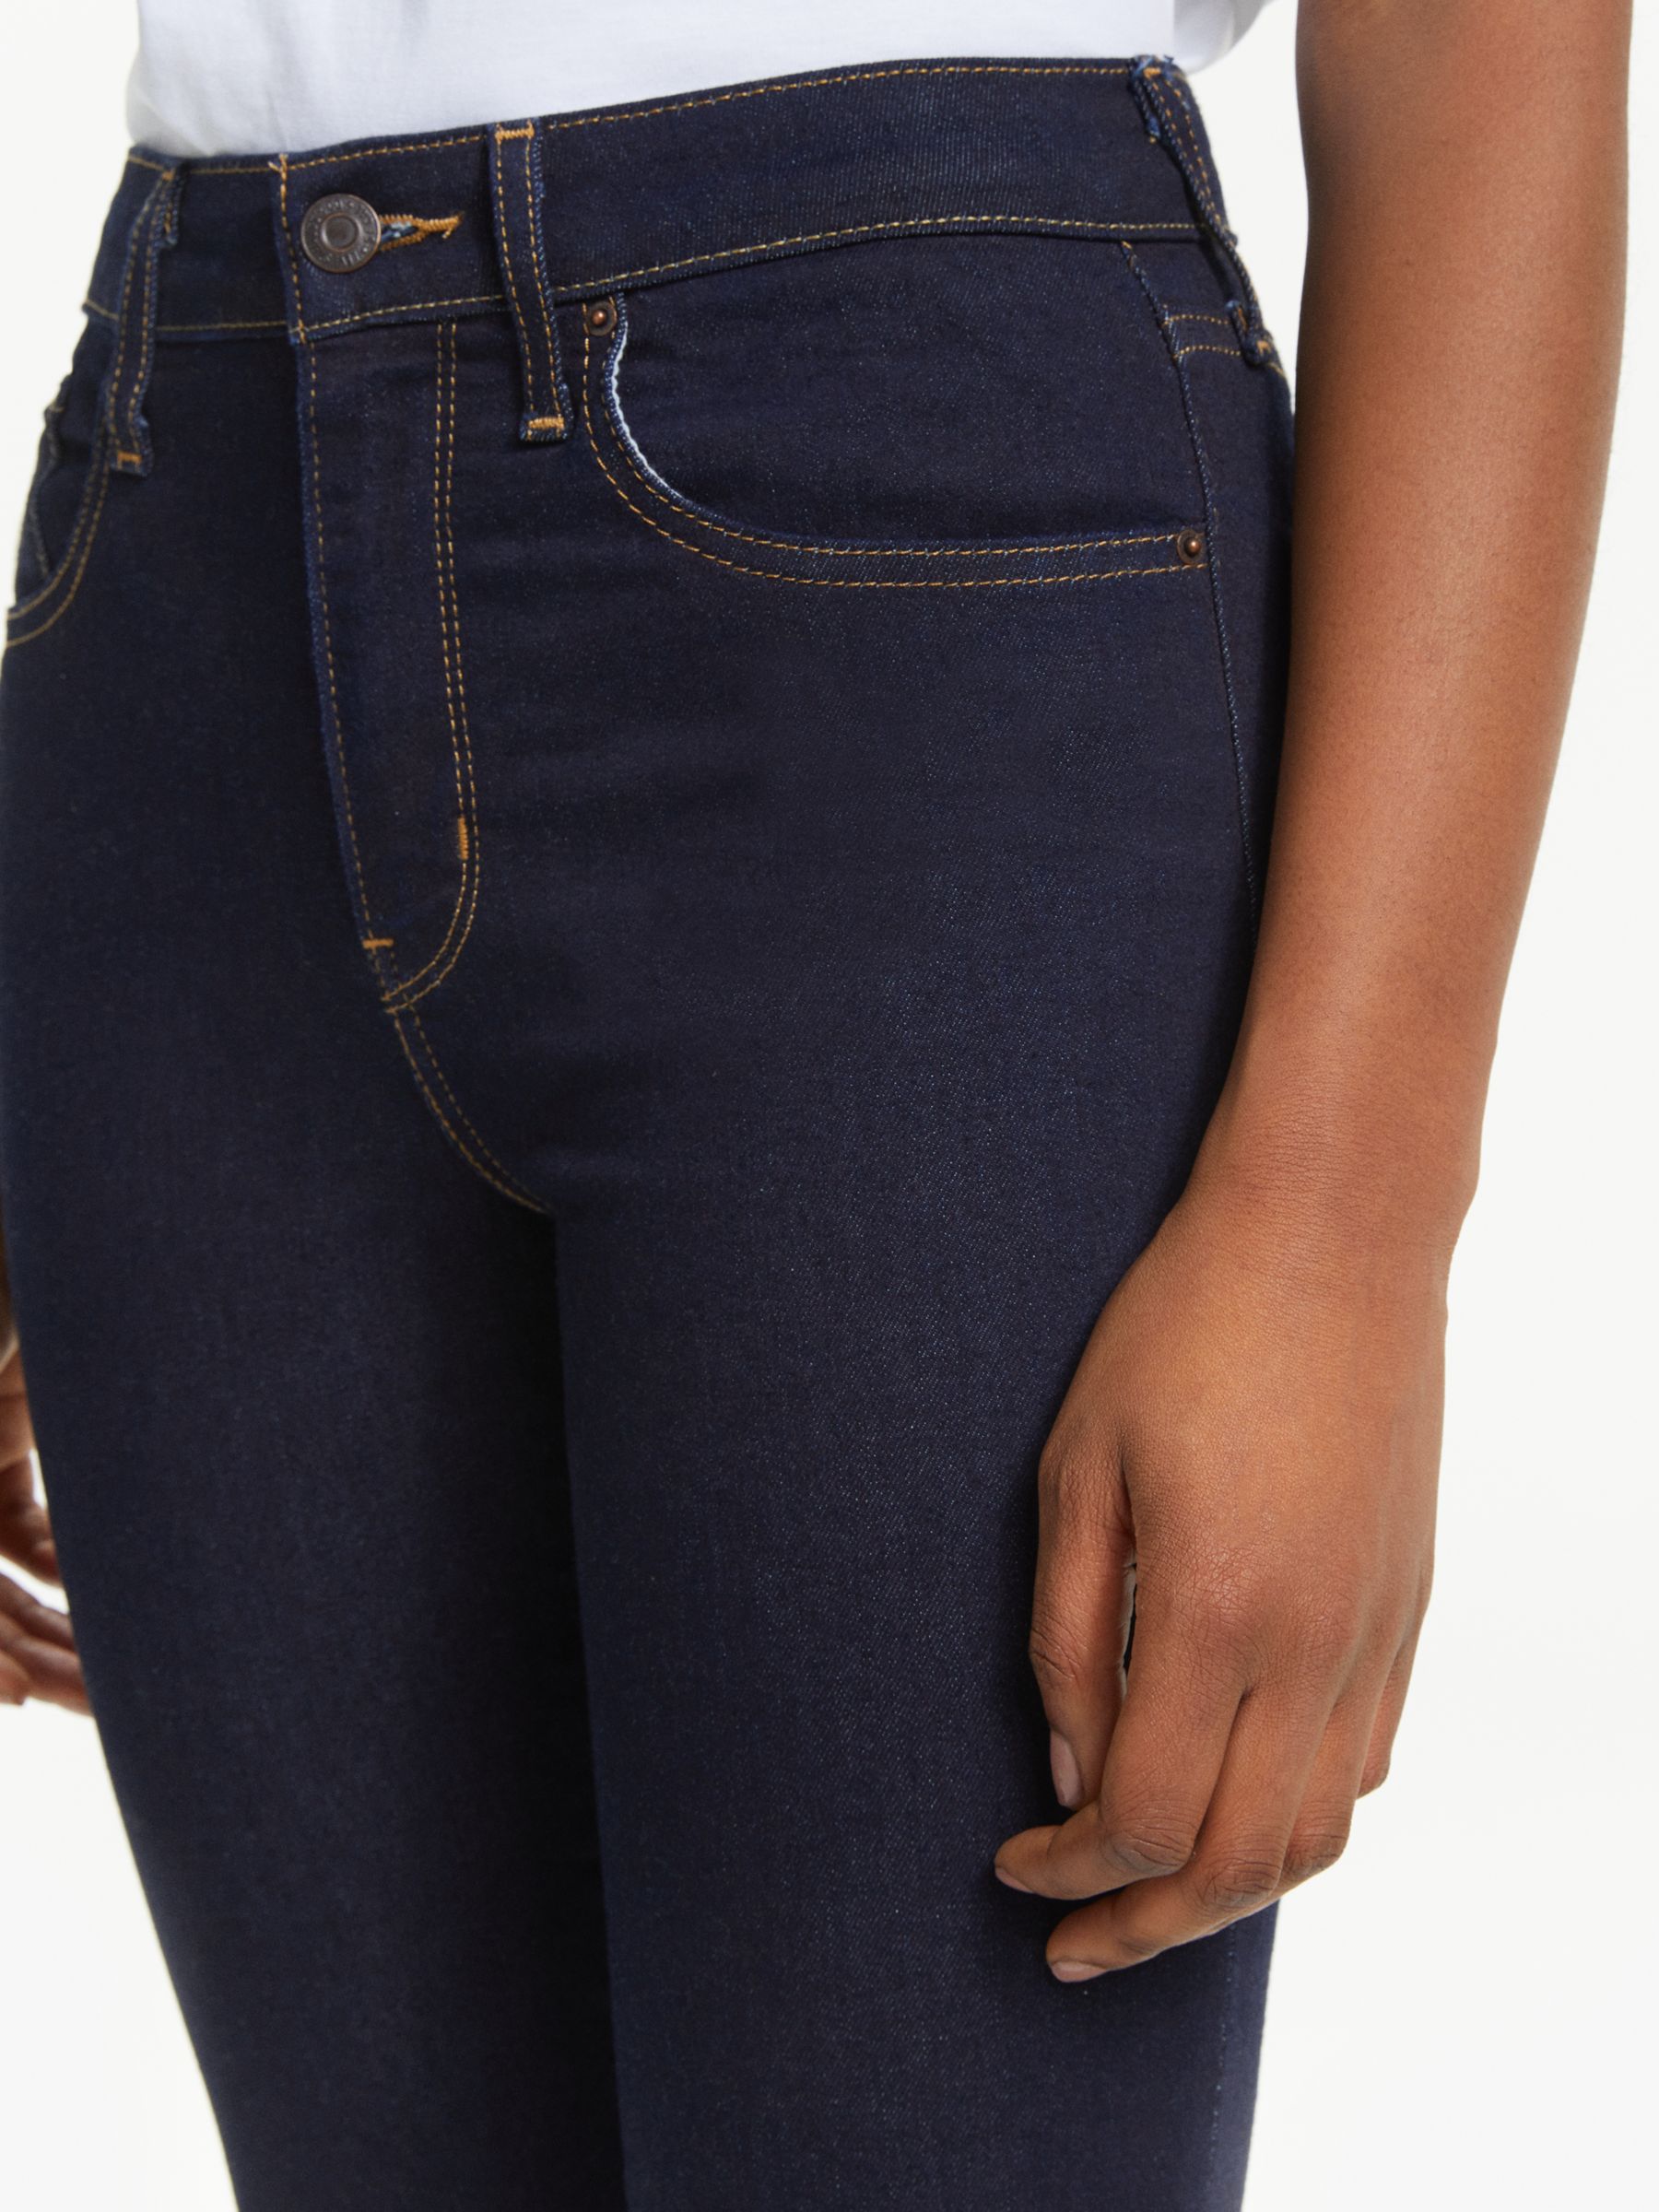 Levi's 721 High Rise Skinny Jeans, To 